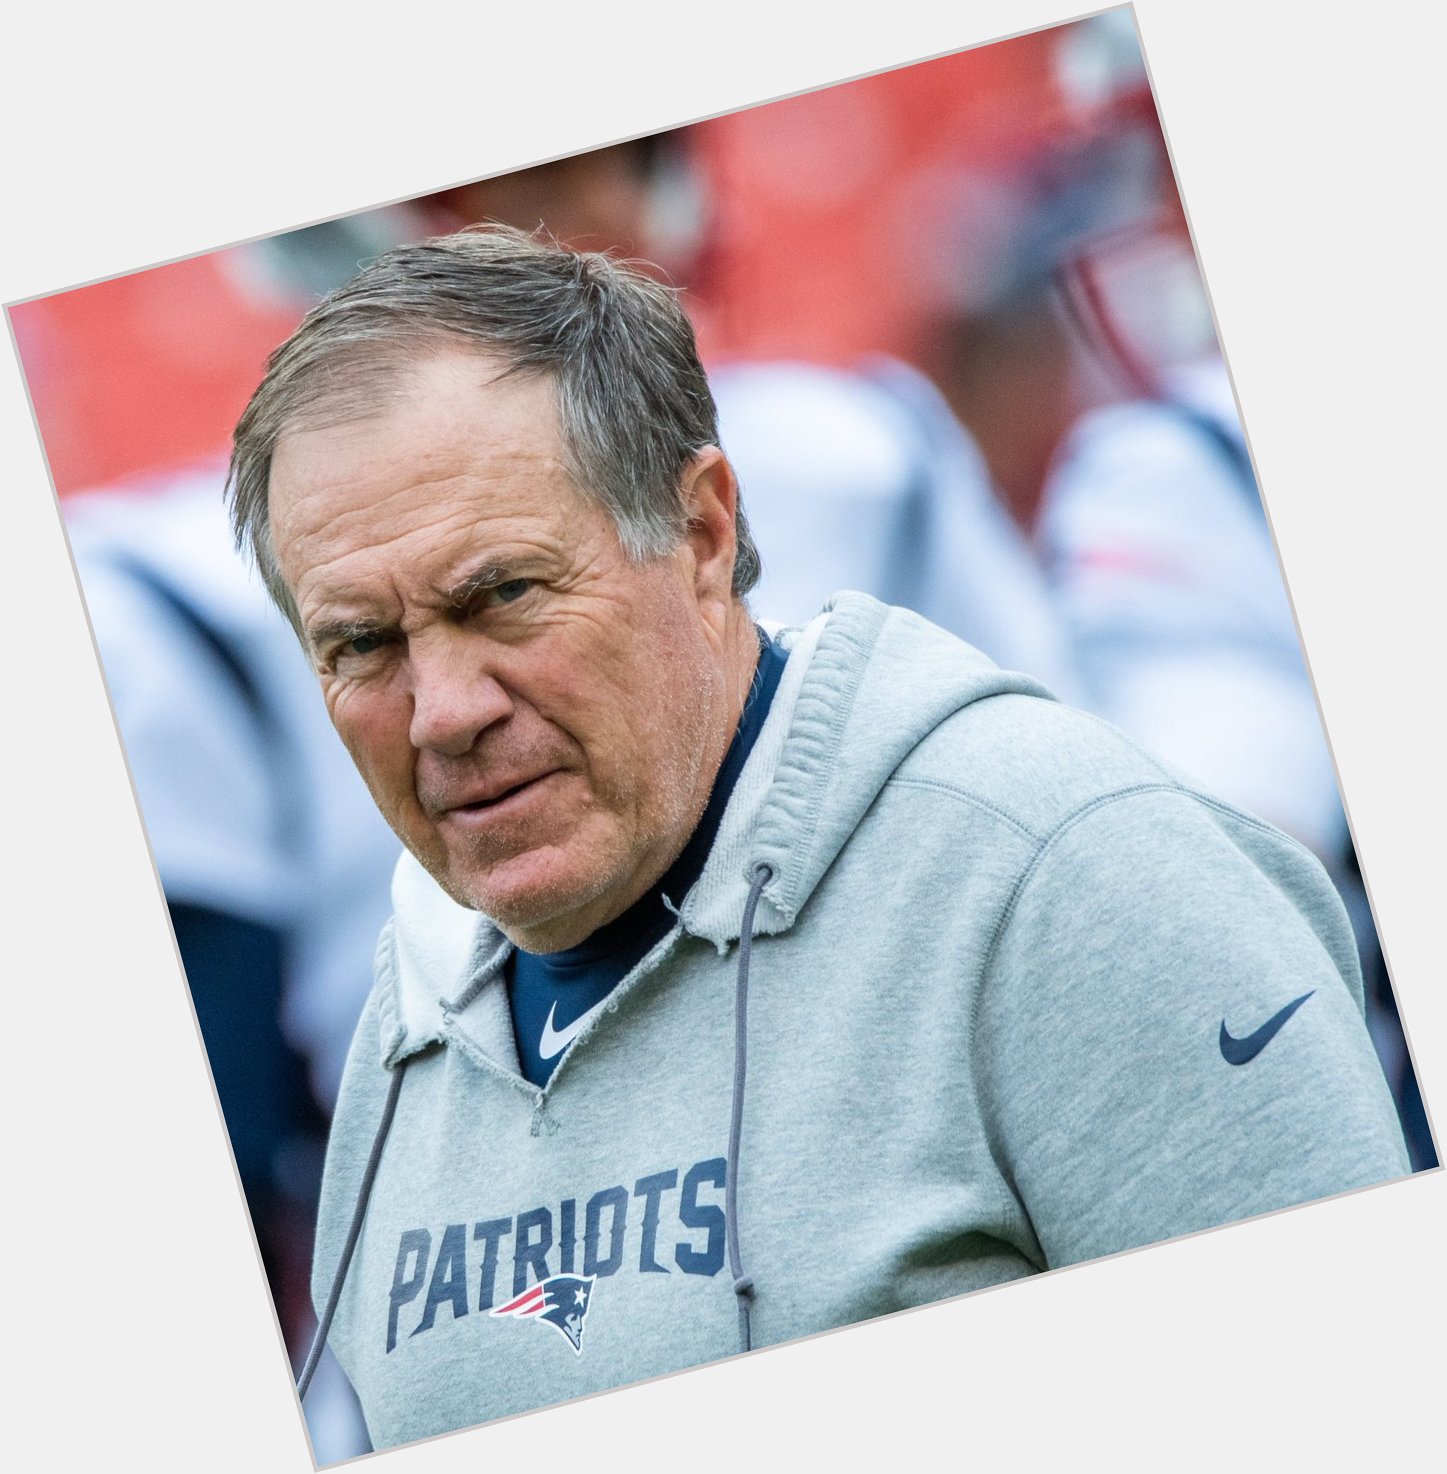 Happy birthday to head coach Bill Belichick, who turns 69 years old today.  